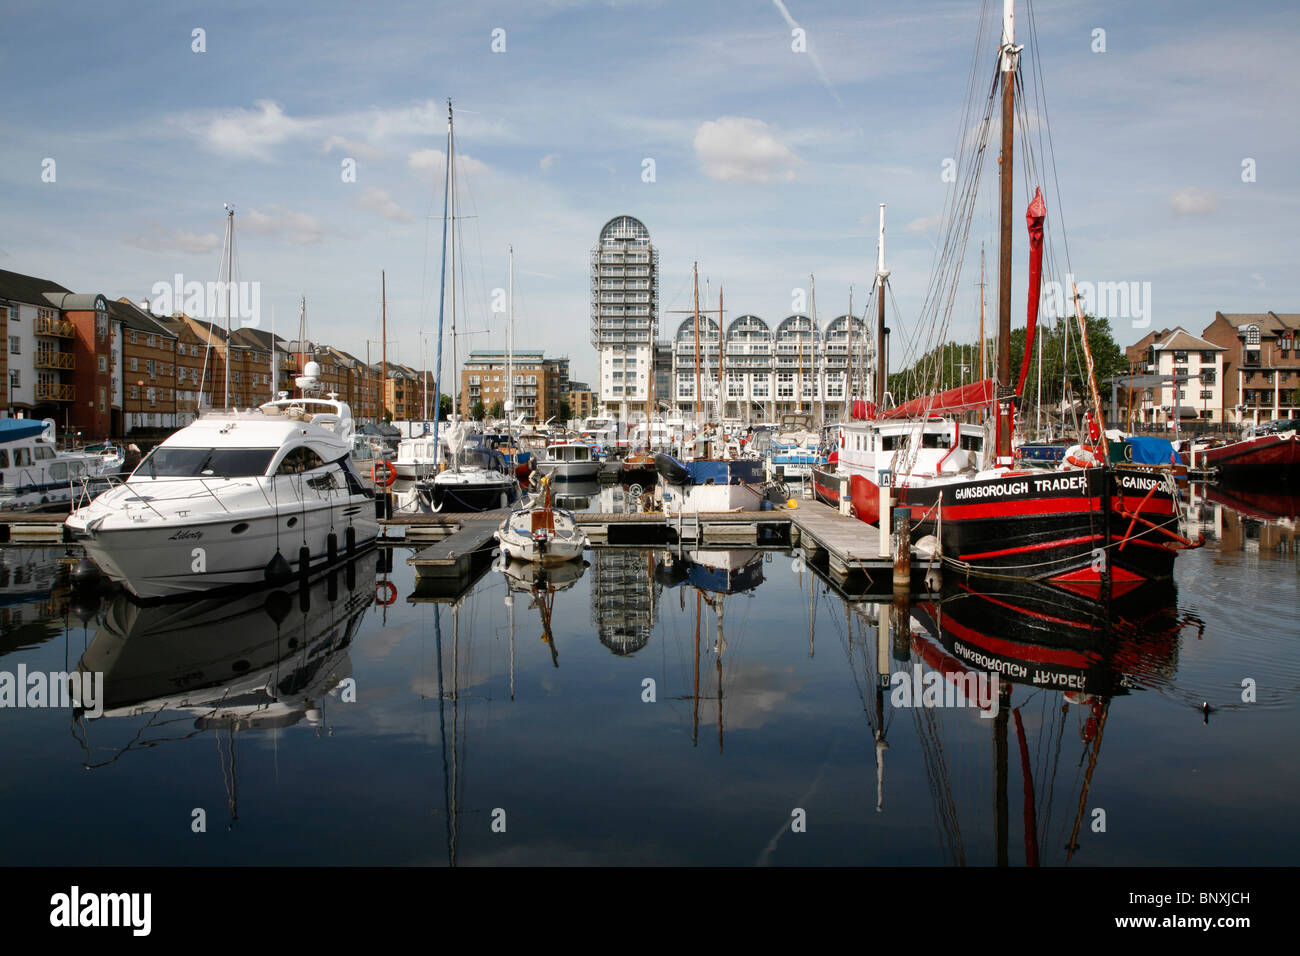 Boats moored in front of Baltic House in the South Dock Marina, Rotherhithe, London, UK Stock Photo